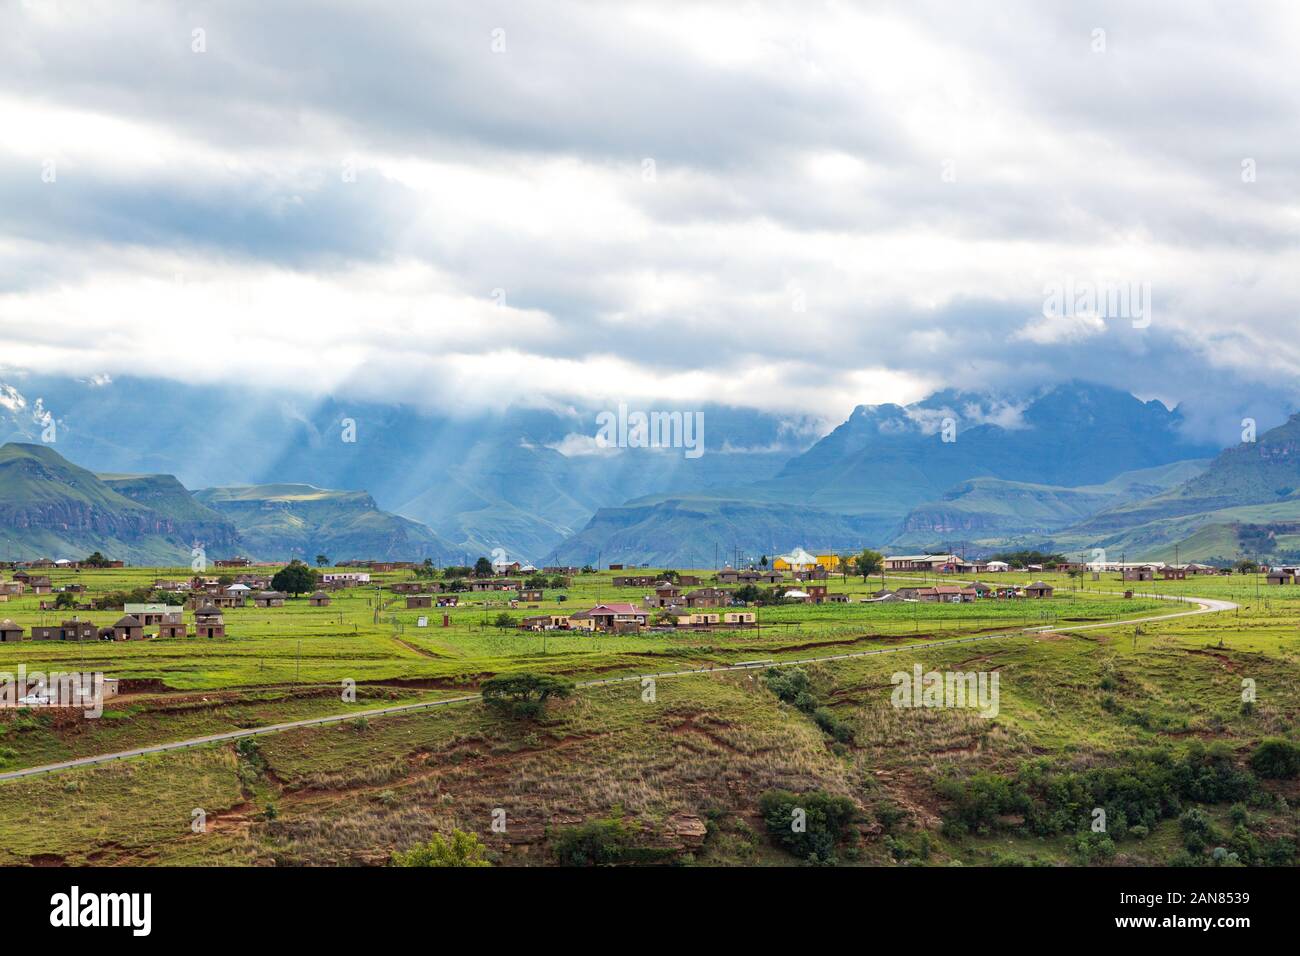 Village in the mountains of Maloti Drakensberg Park with sunbeams breaking through the clouds, South Africa Stock Photo